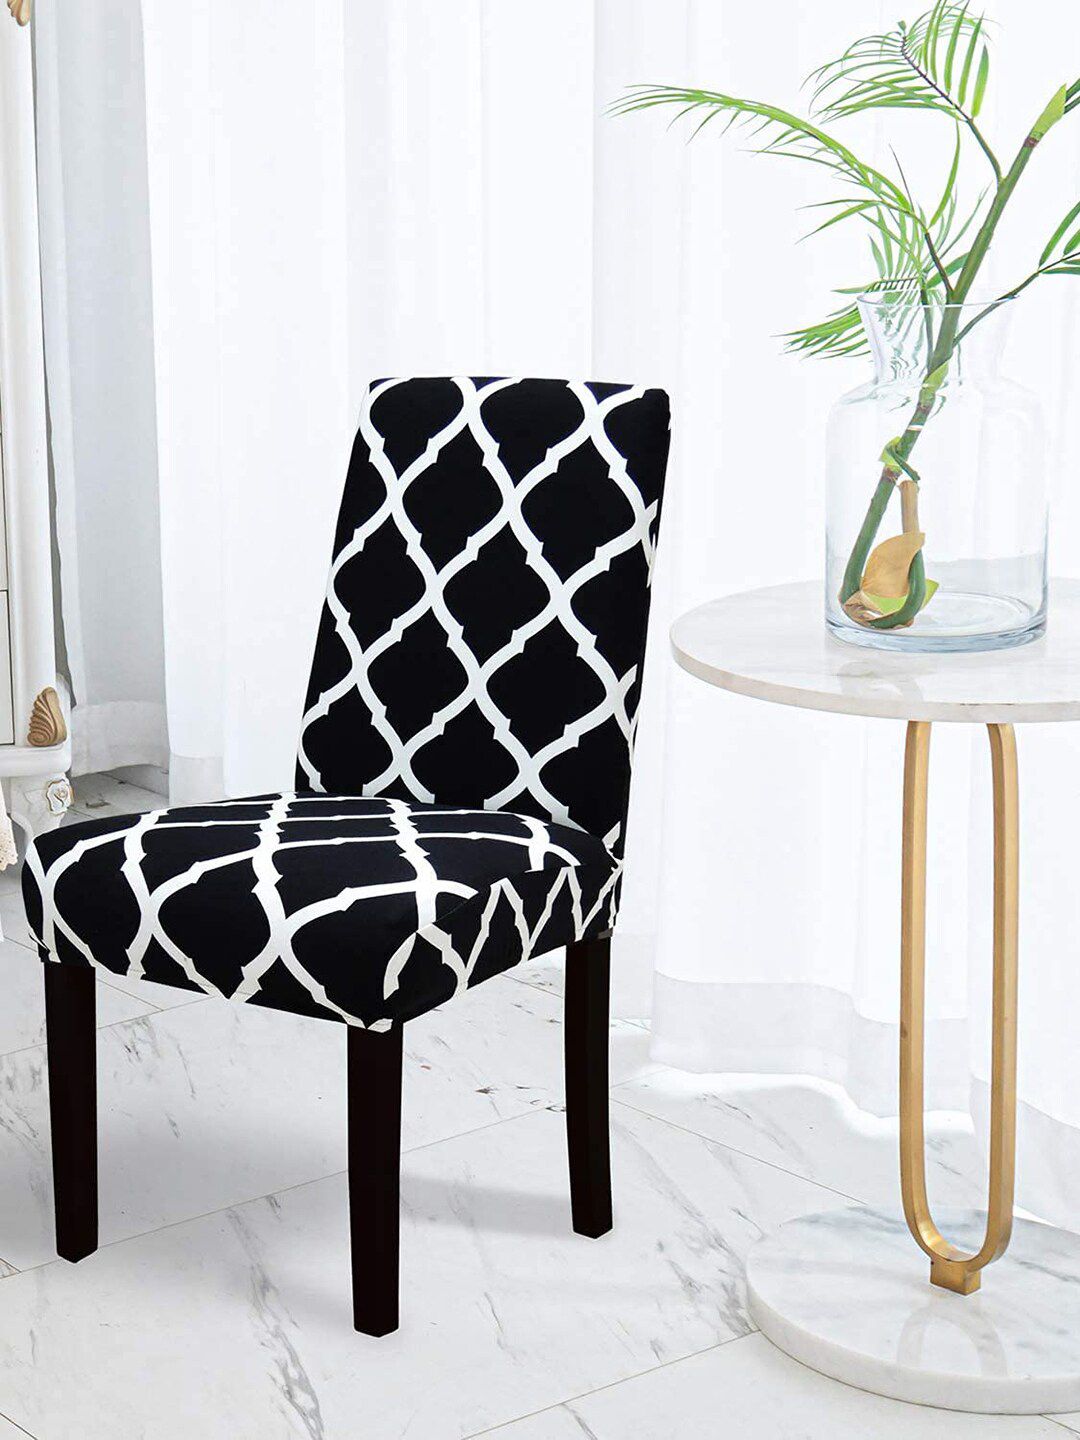 HOUSE OF QUIRK Black & White Printed Chair Cover Price in India